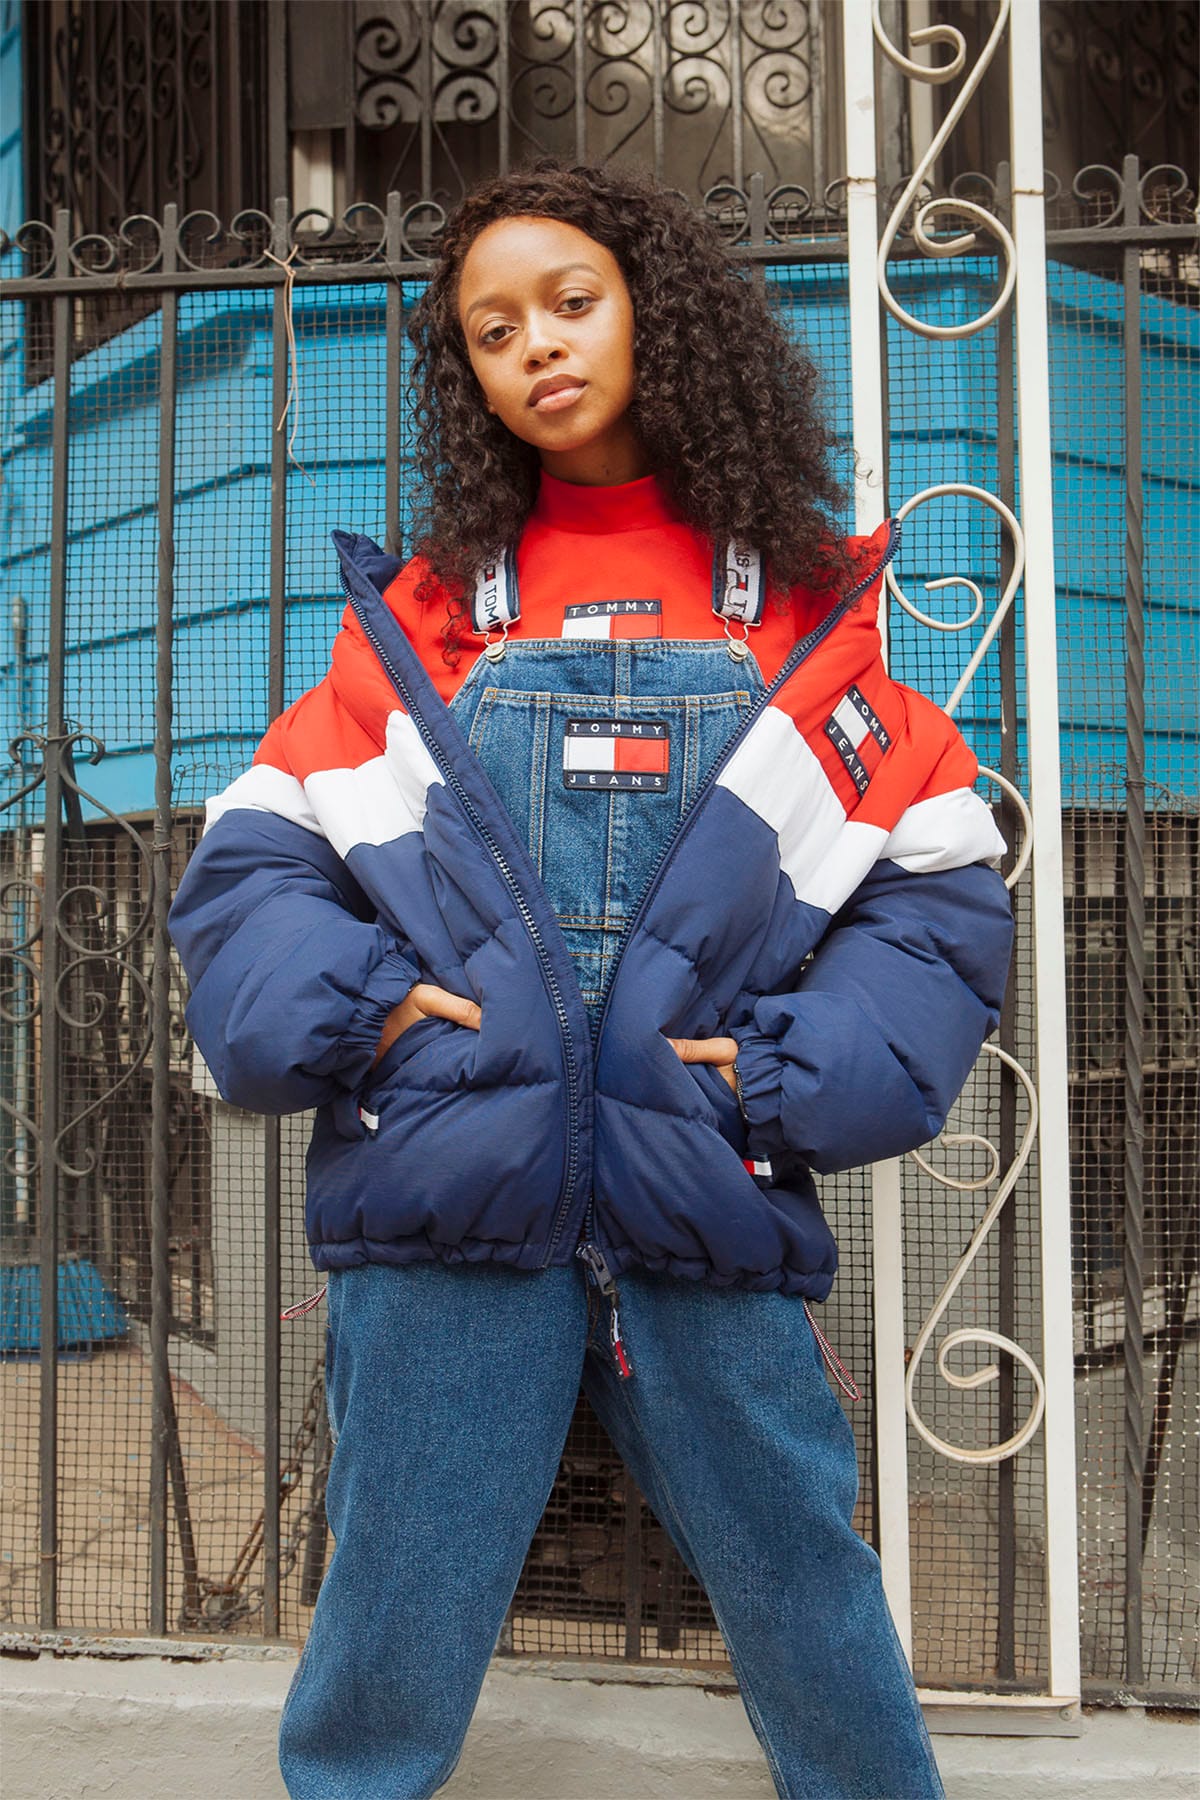 tommy jeans 90s collection